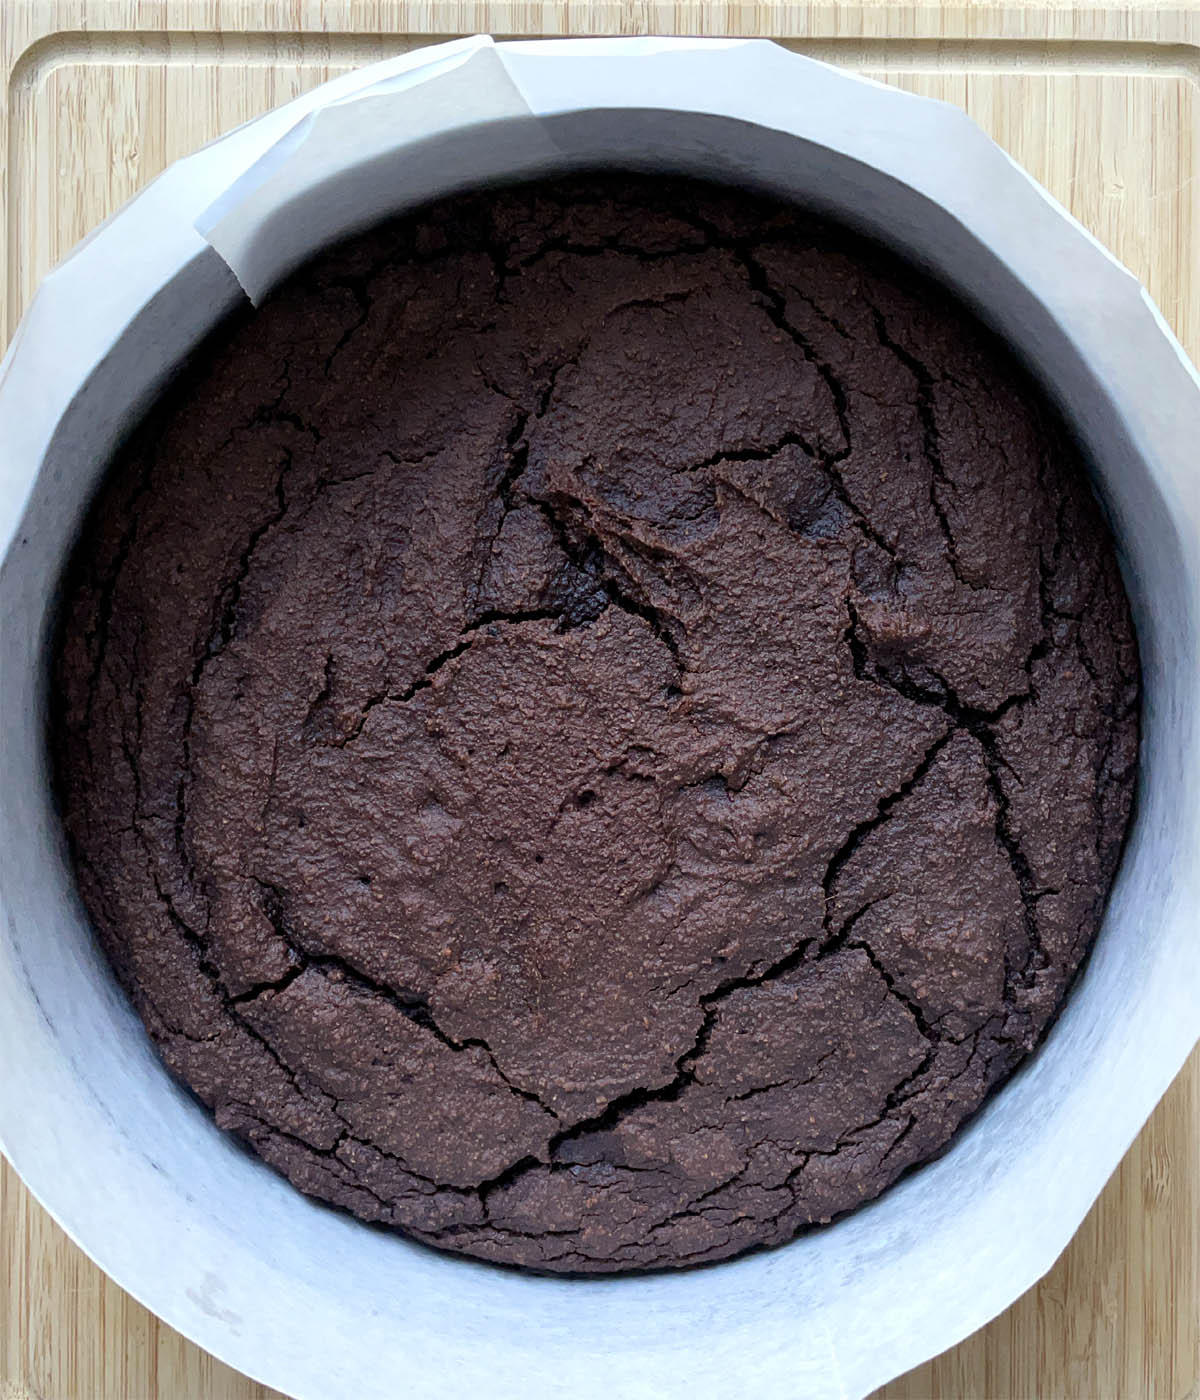 A brown baked chocolate cake in a round pan lined with white paper.